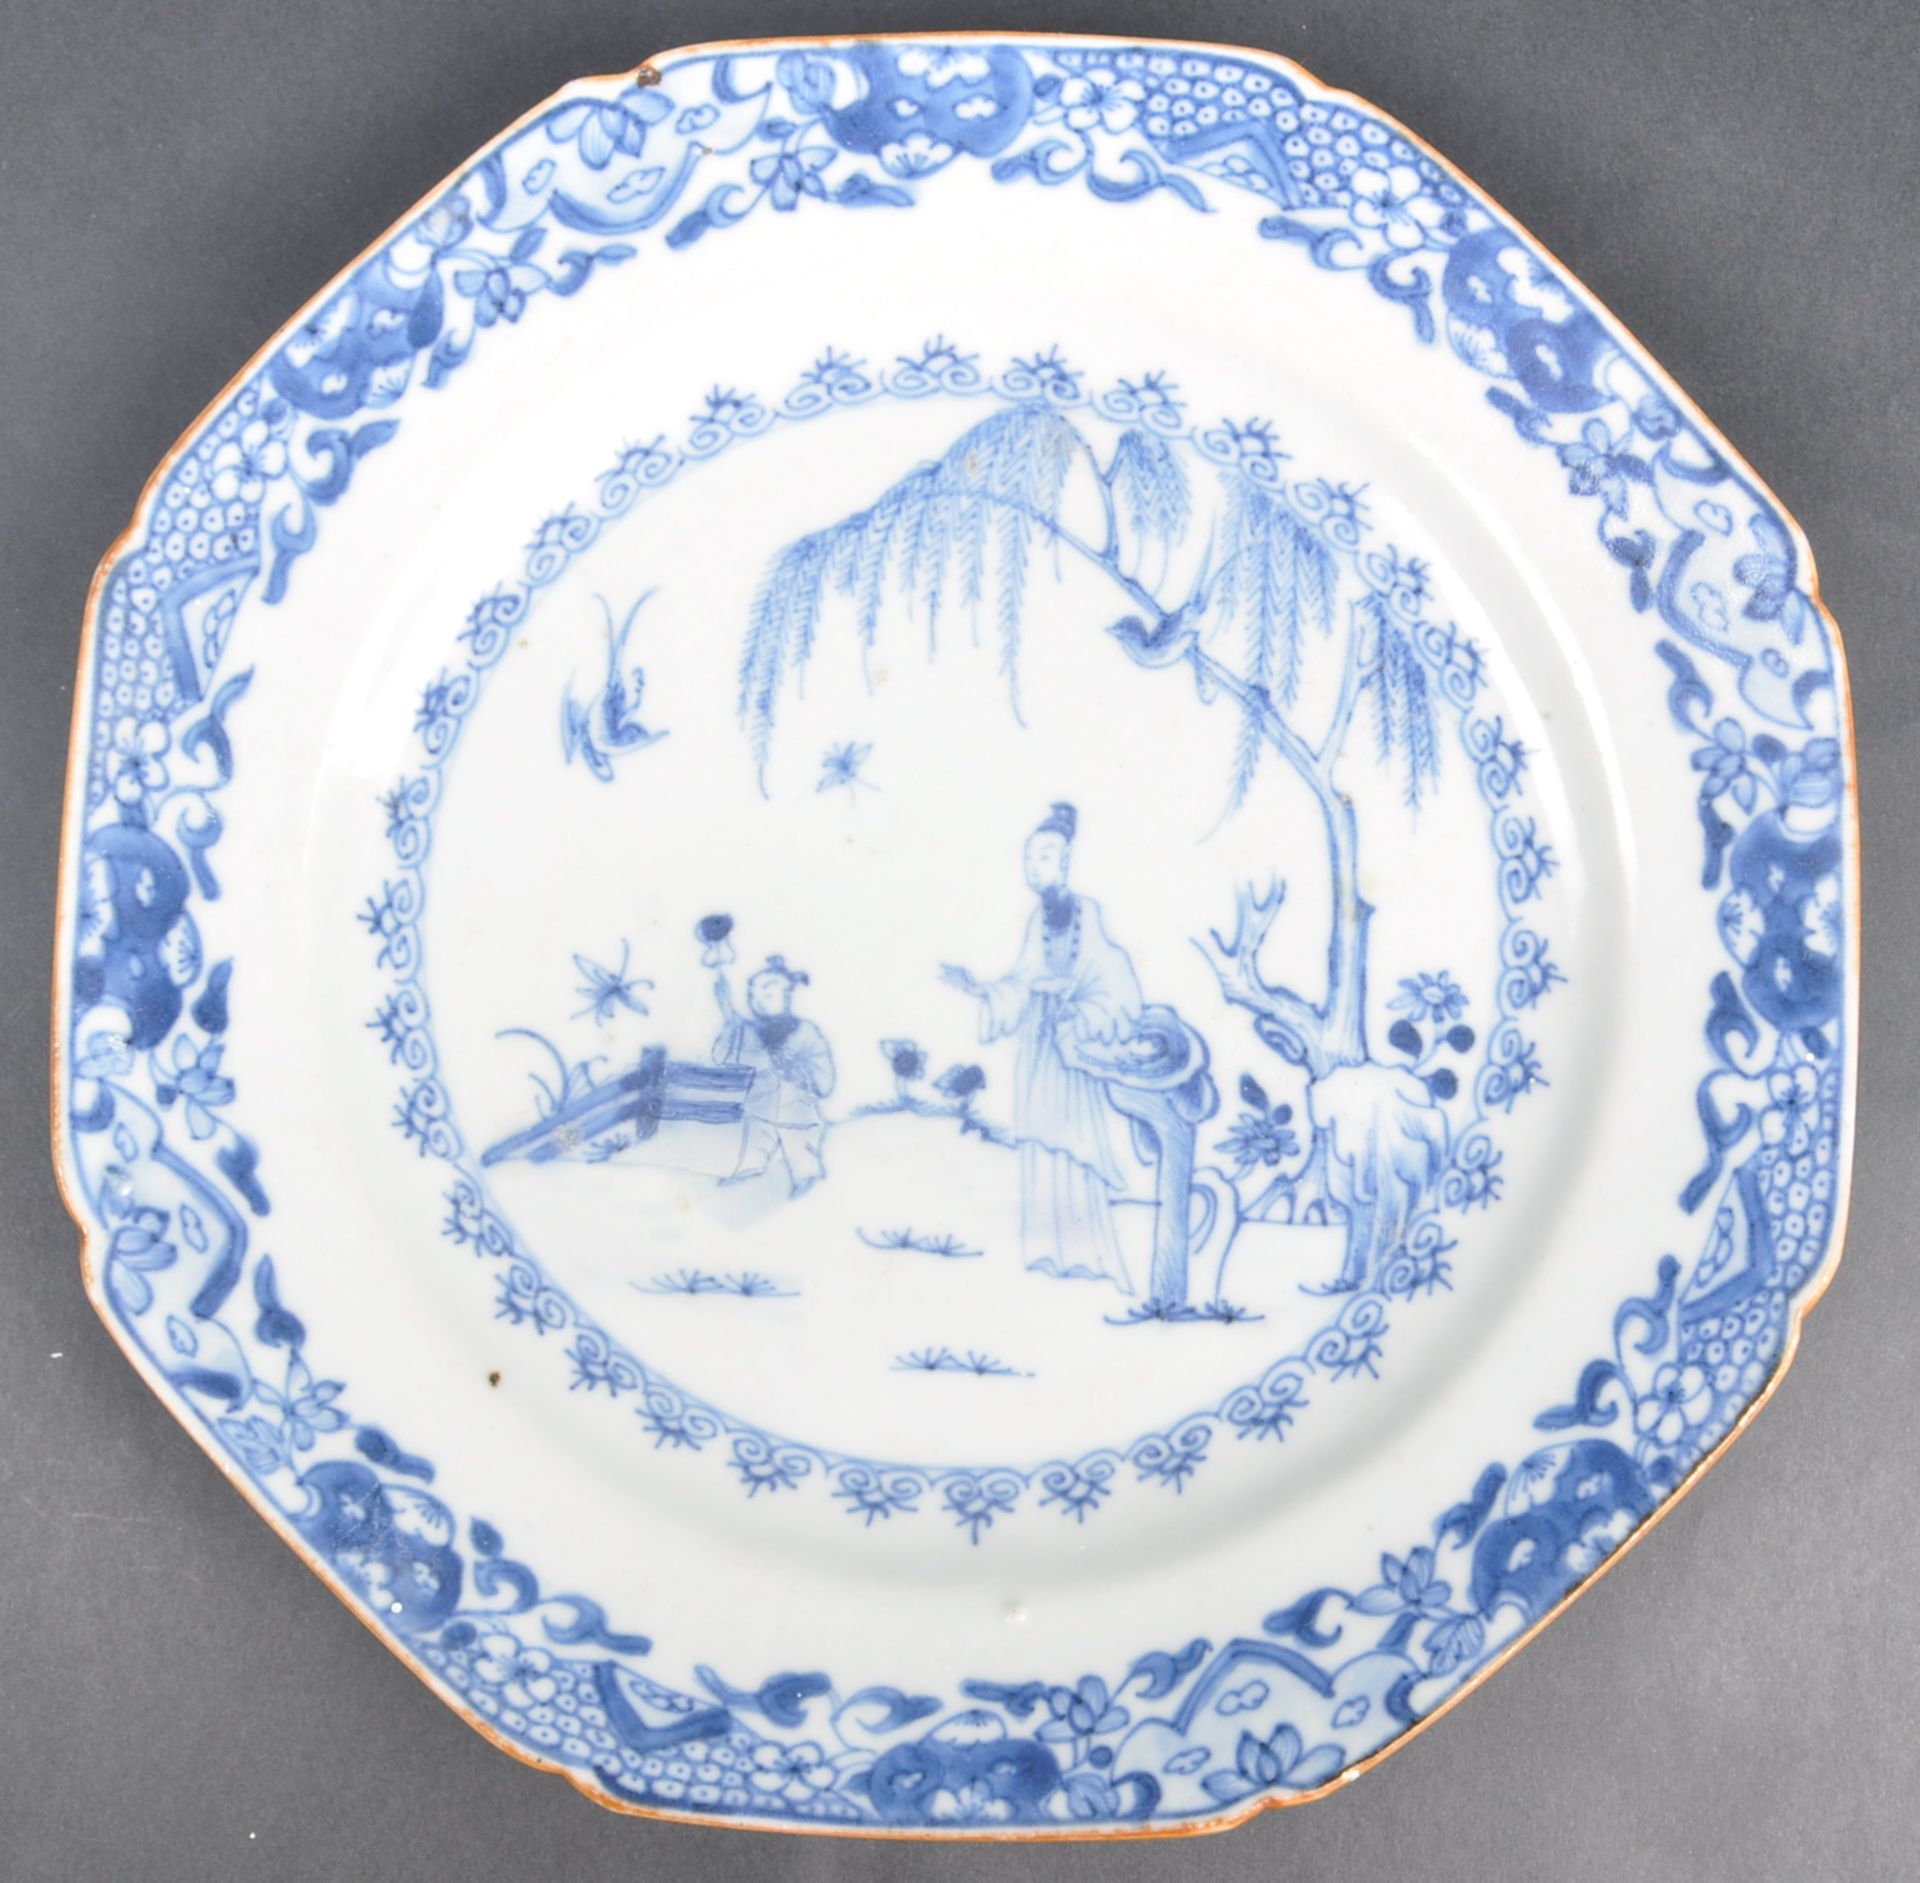 18TH CENTURY CHINESE QIANLONG PERIOD BLUE & WHITE PLATE